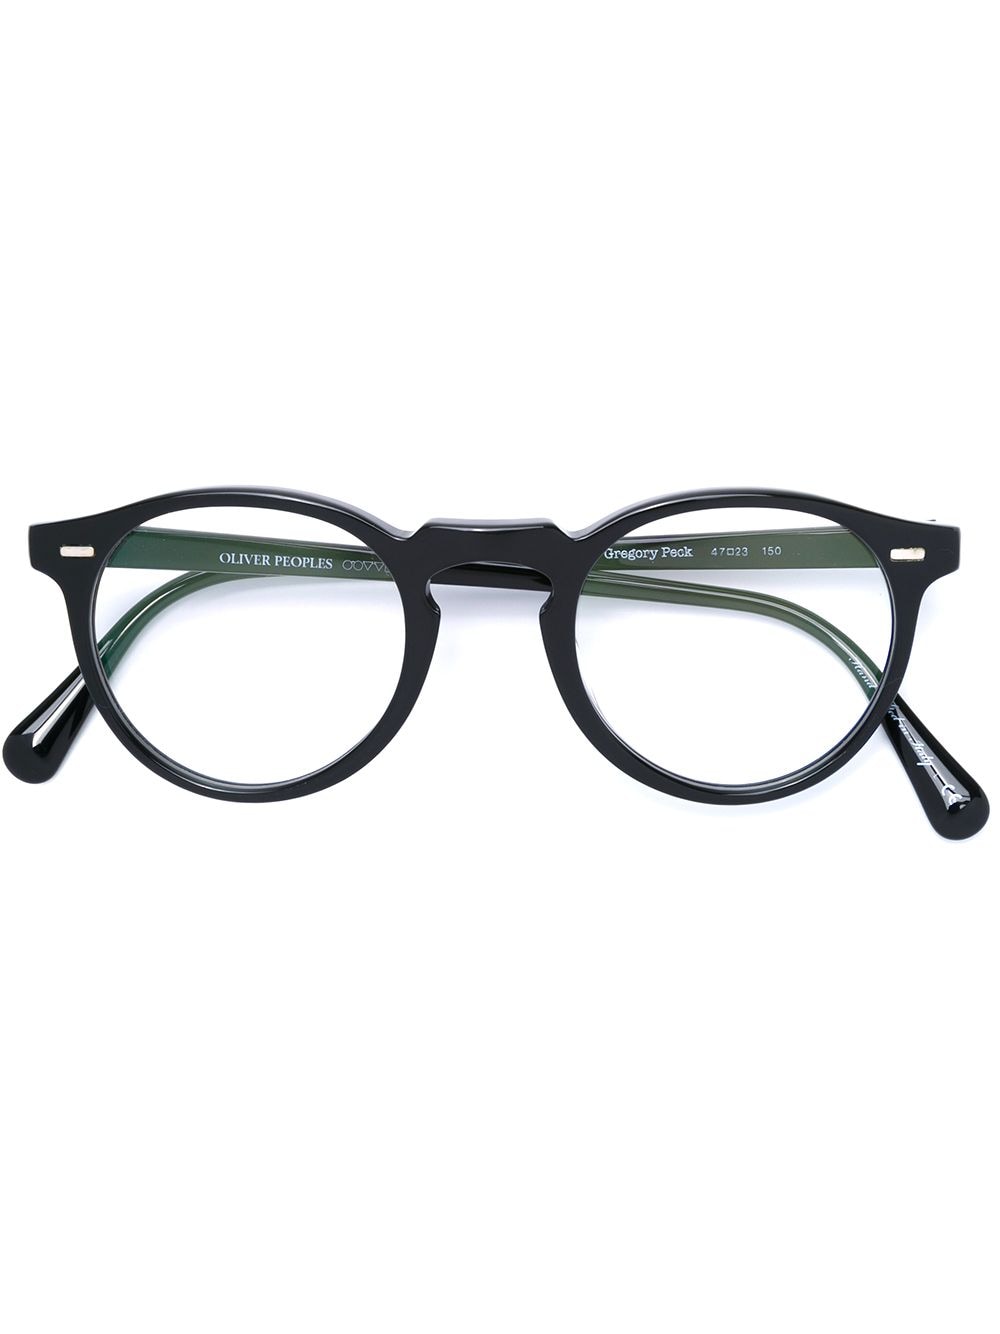 Oliver Peoples очки 'Gregory Peck' от Oliver Peoples